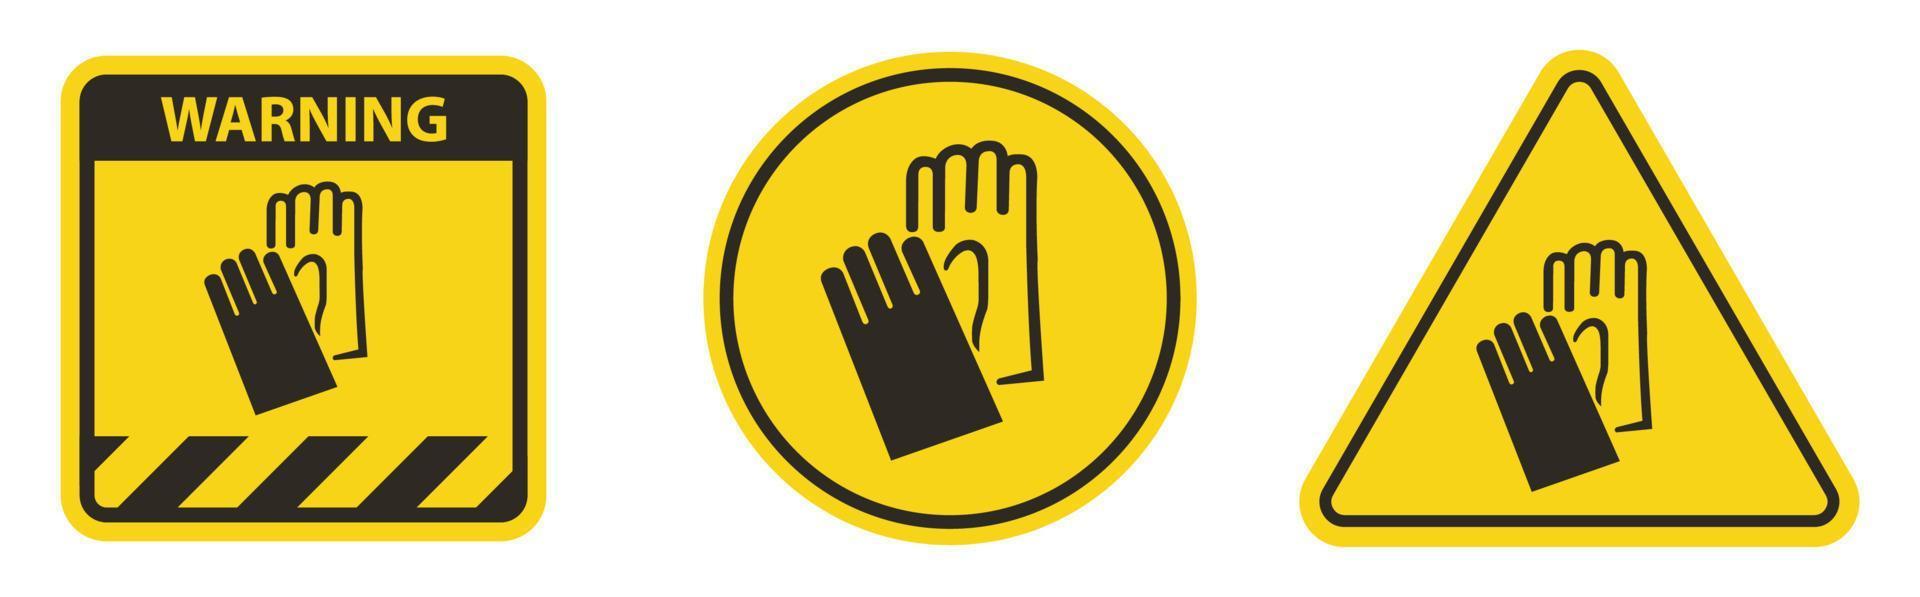 Caution Symbol Wear Hand Protection sign vector